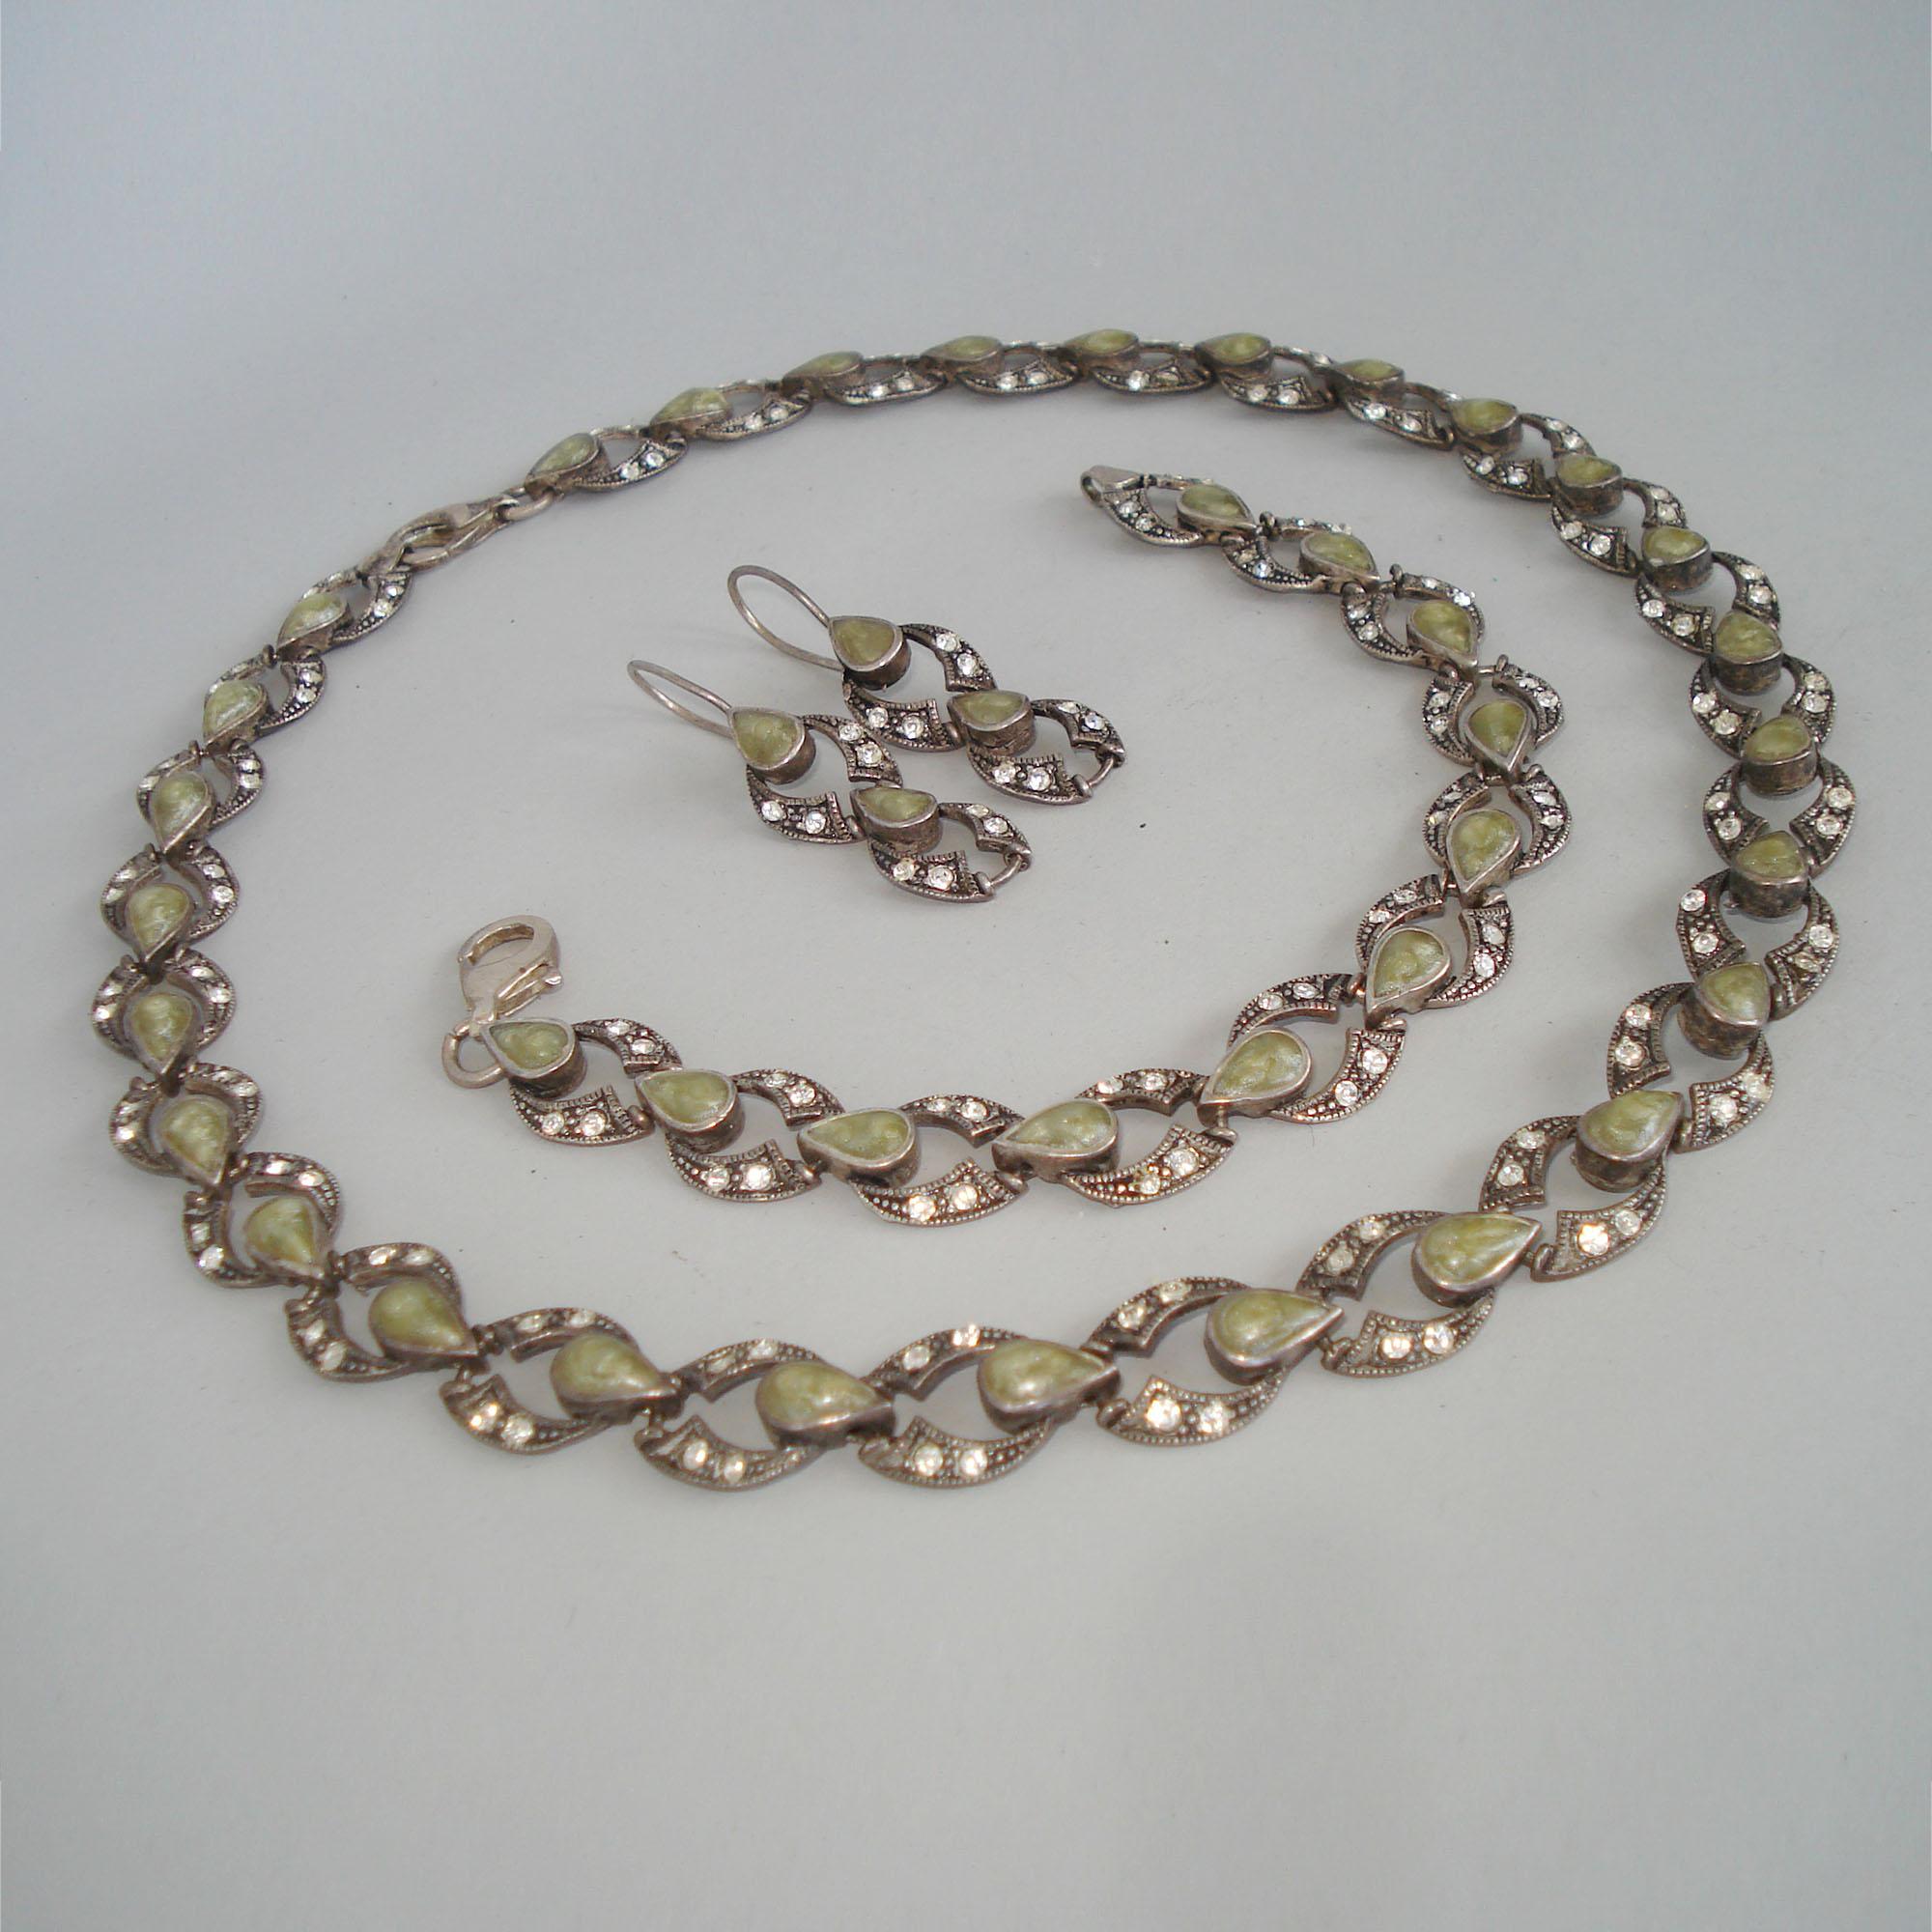 Vintage Silver and Marcasite Jewelry Set Necklace, Bracelet and Earrings, 1980s 1